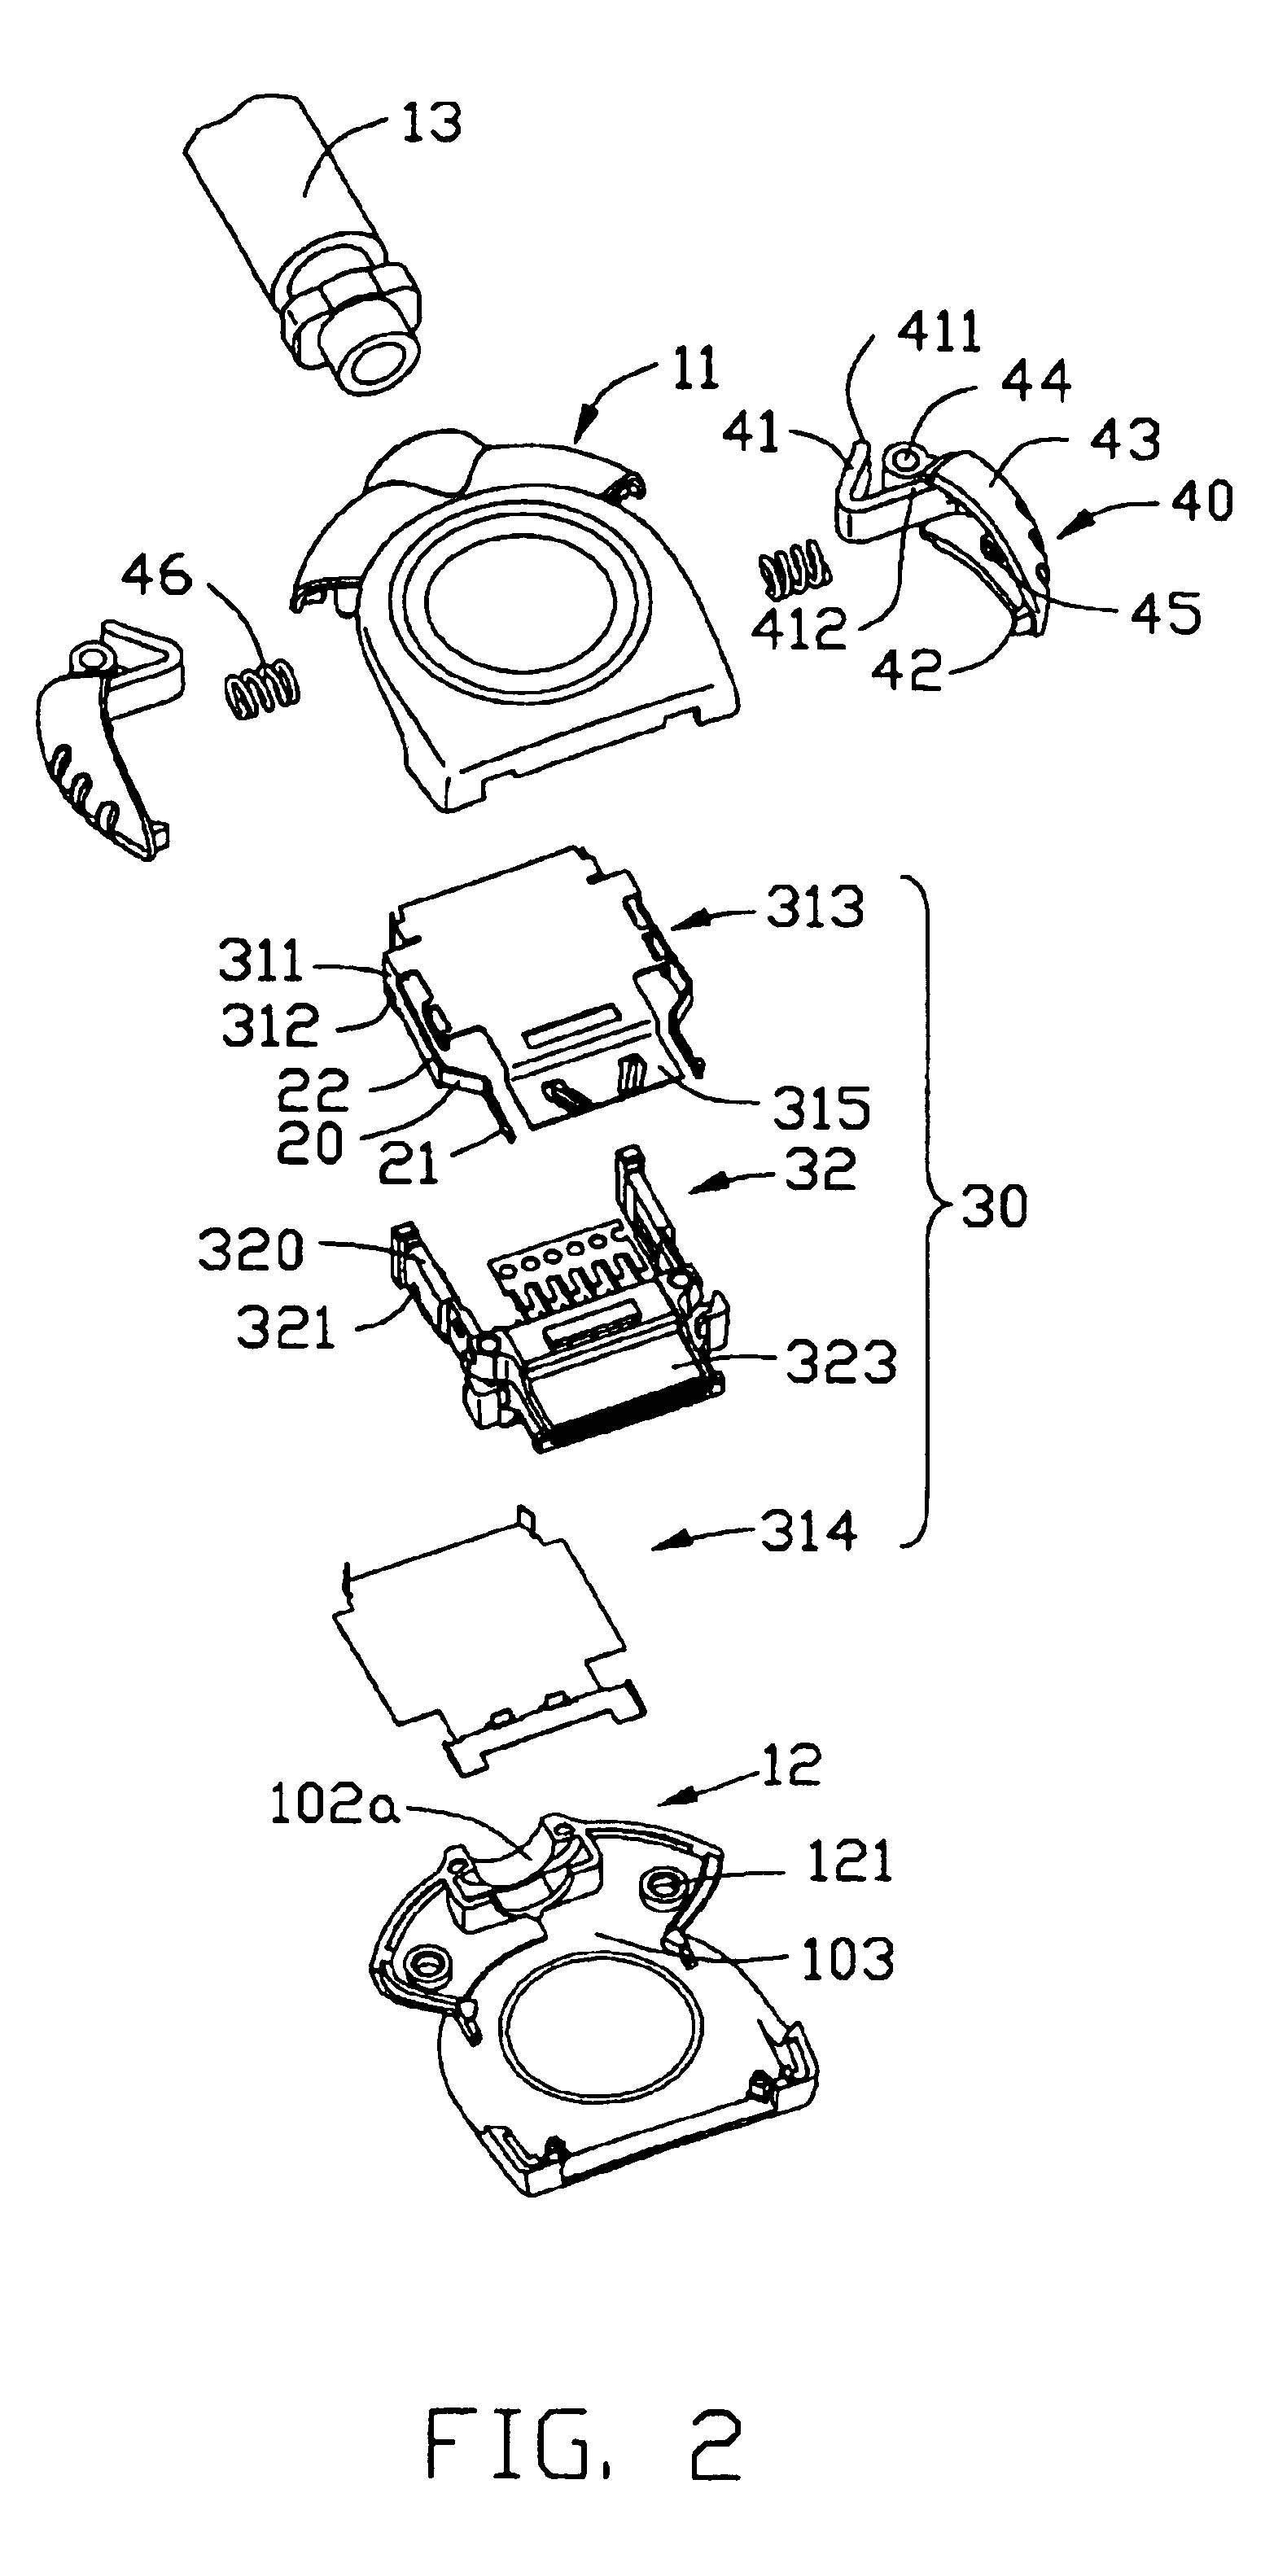 Electrical connector with latching system